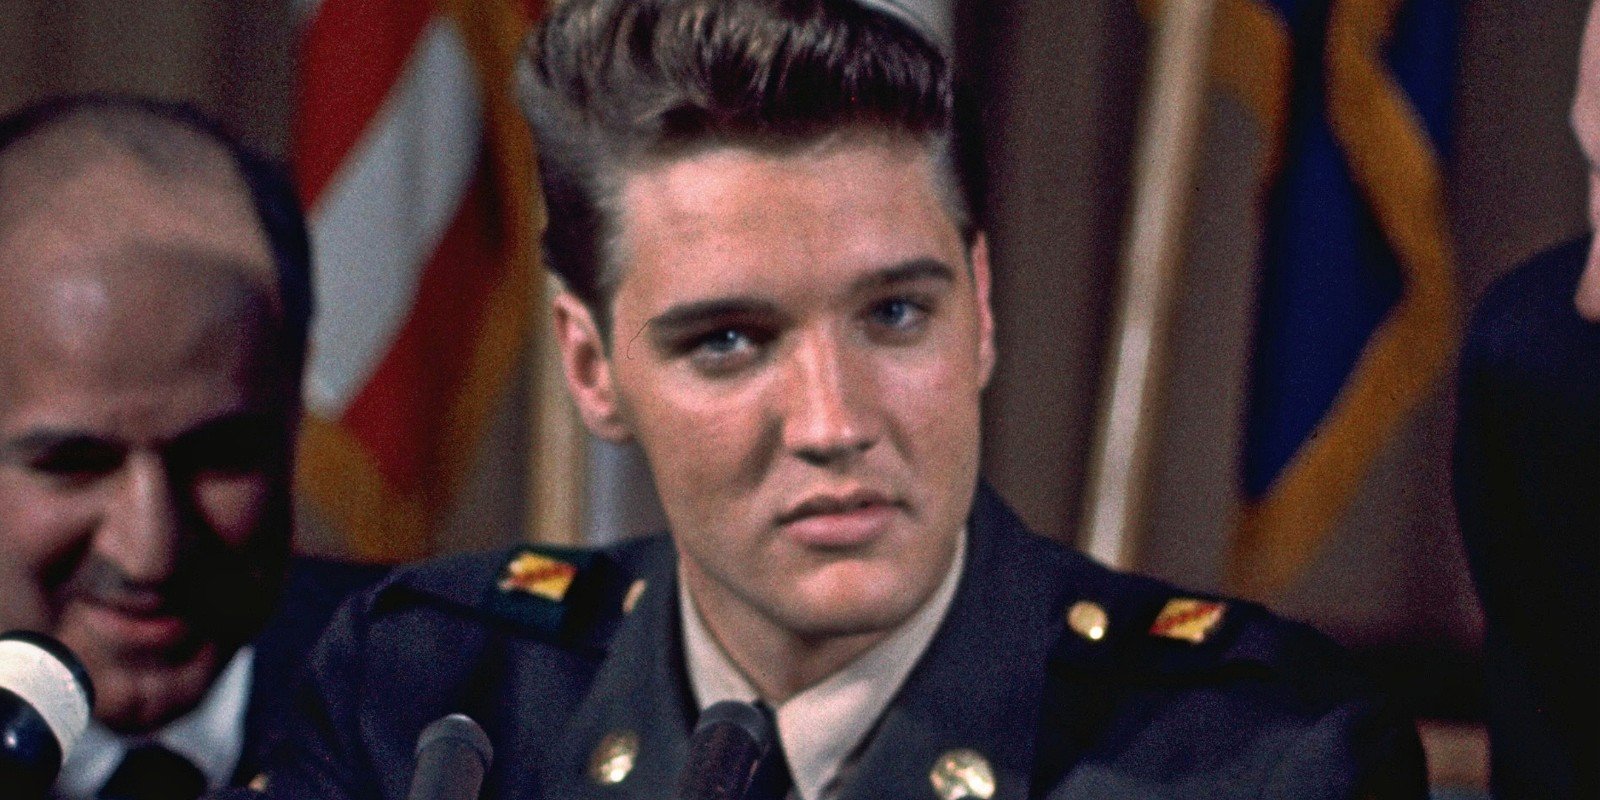 Elvis Presley at a press conference after his Army discharge in 1960.